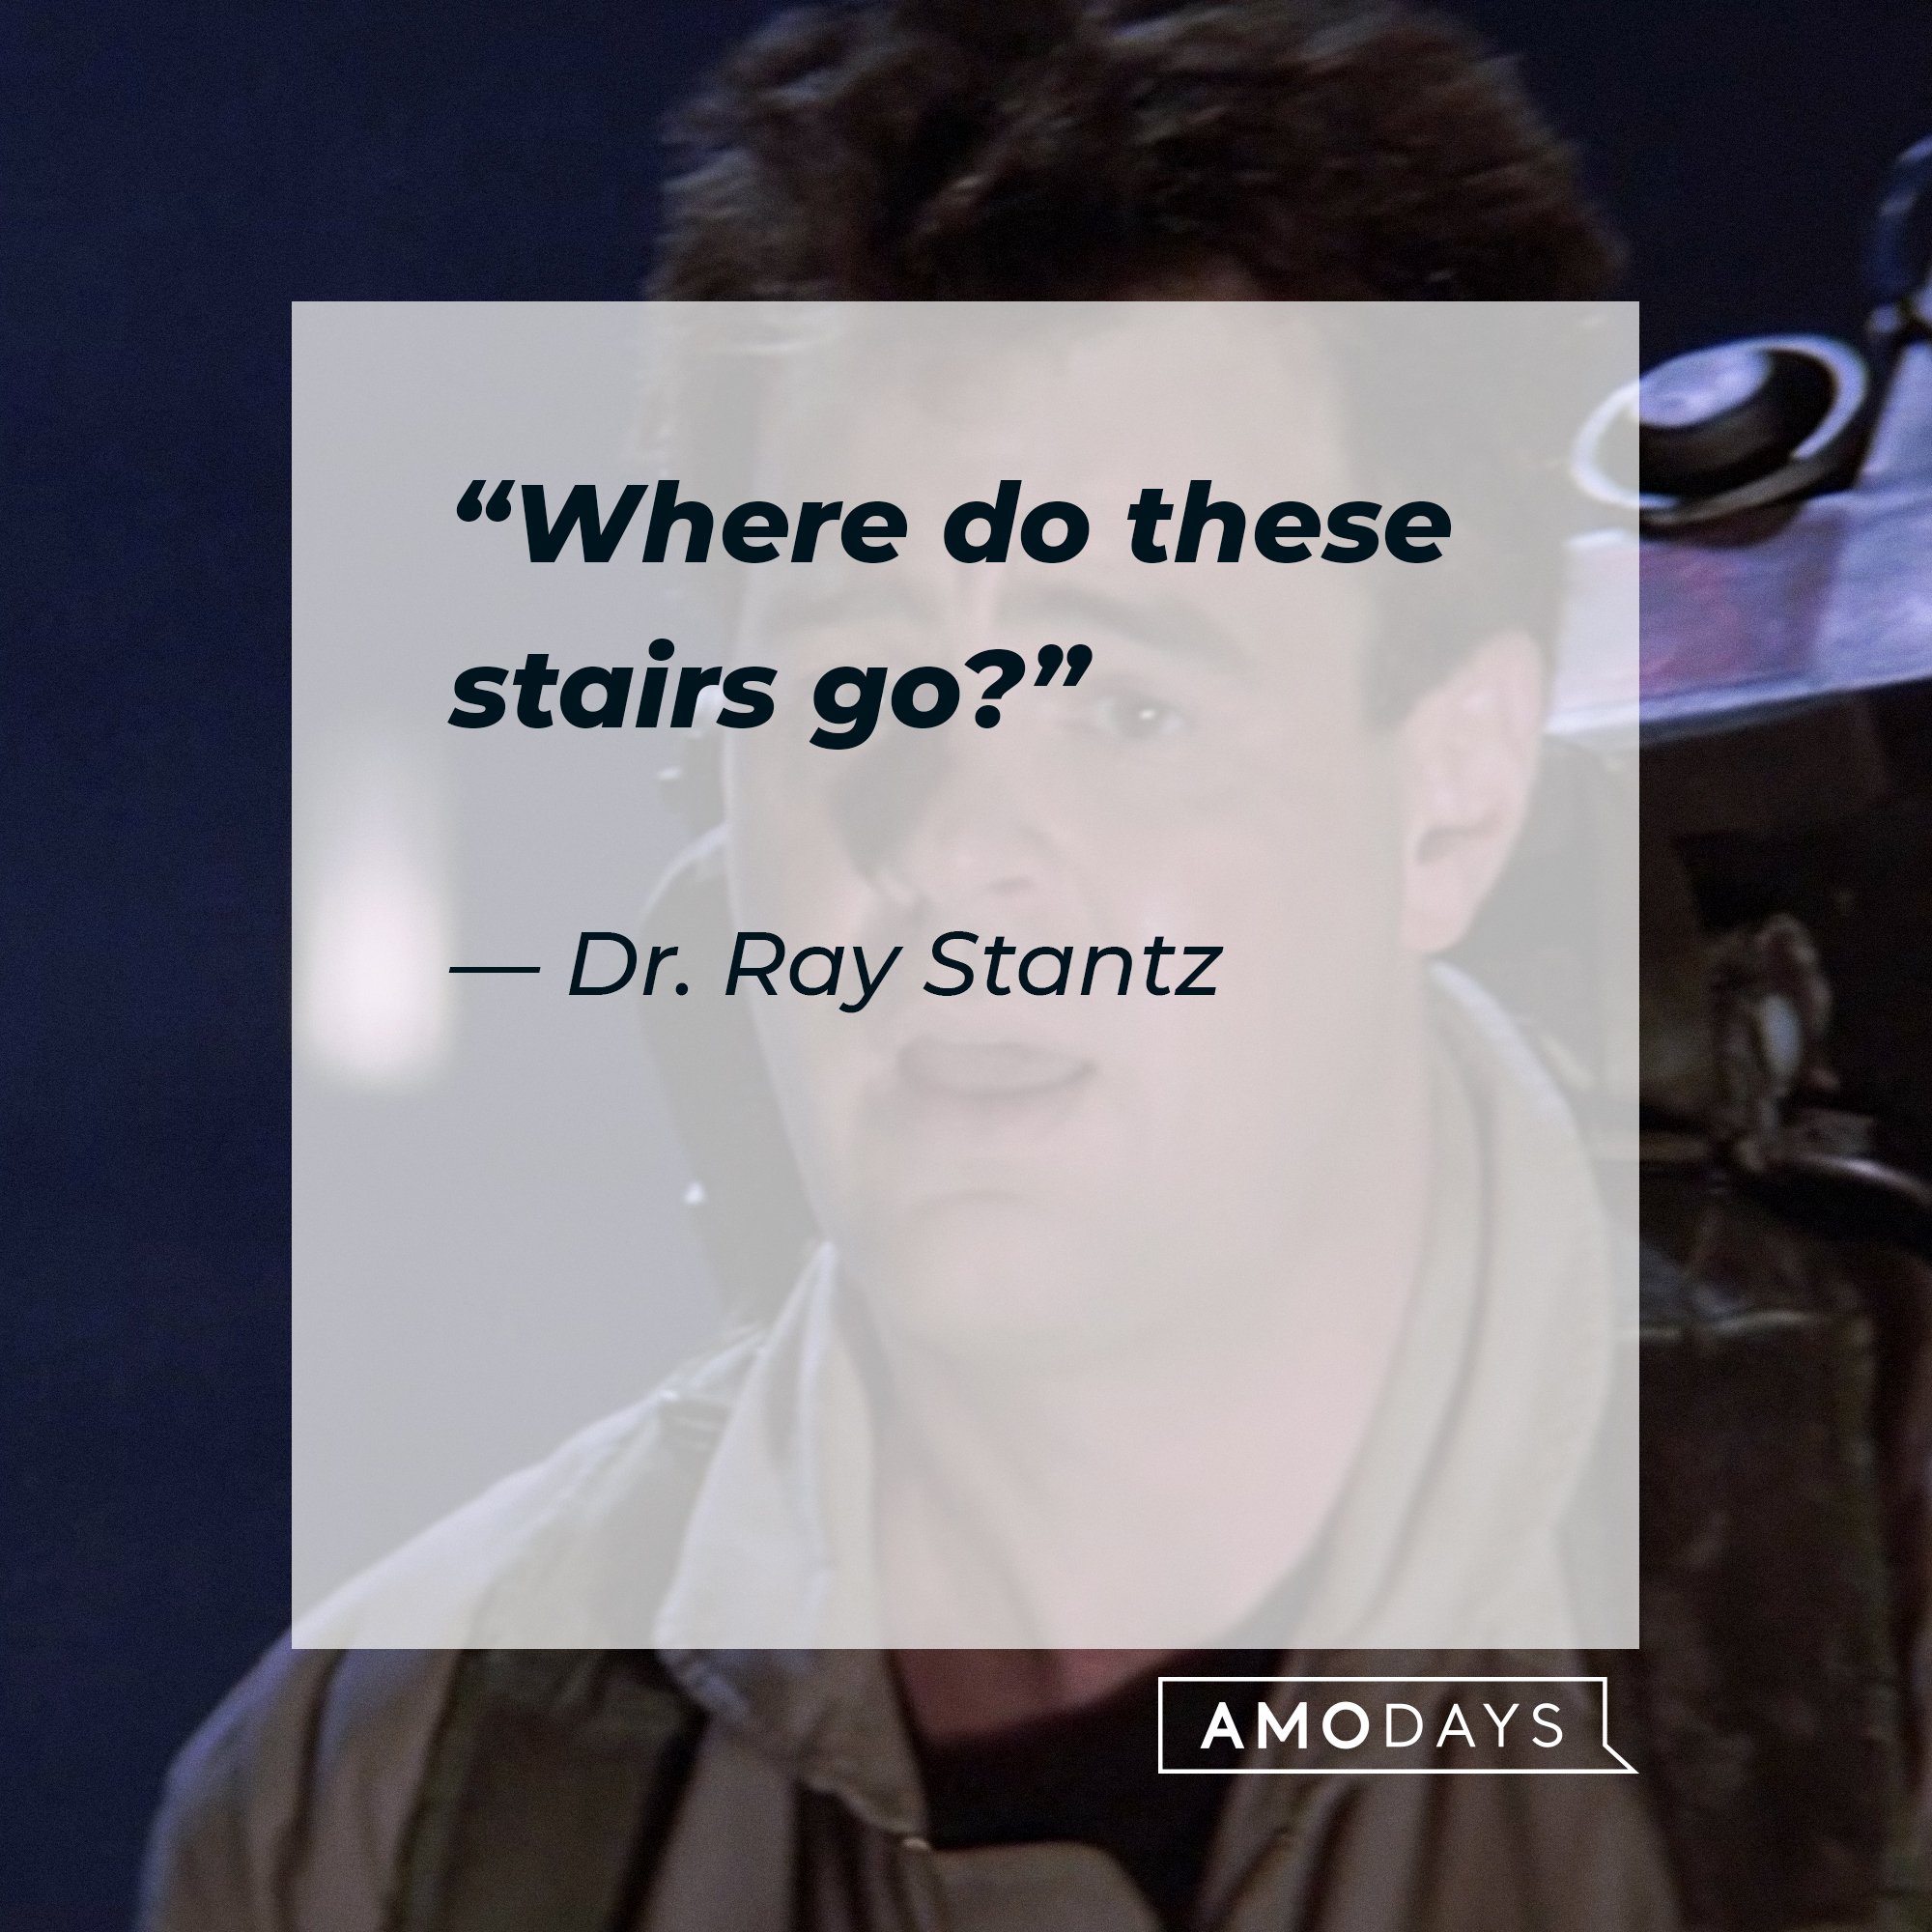 Dr. Ray Stantz's quote: “Where do these stairs go?” | Image: AmoDays